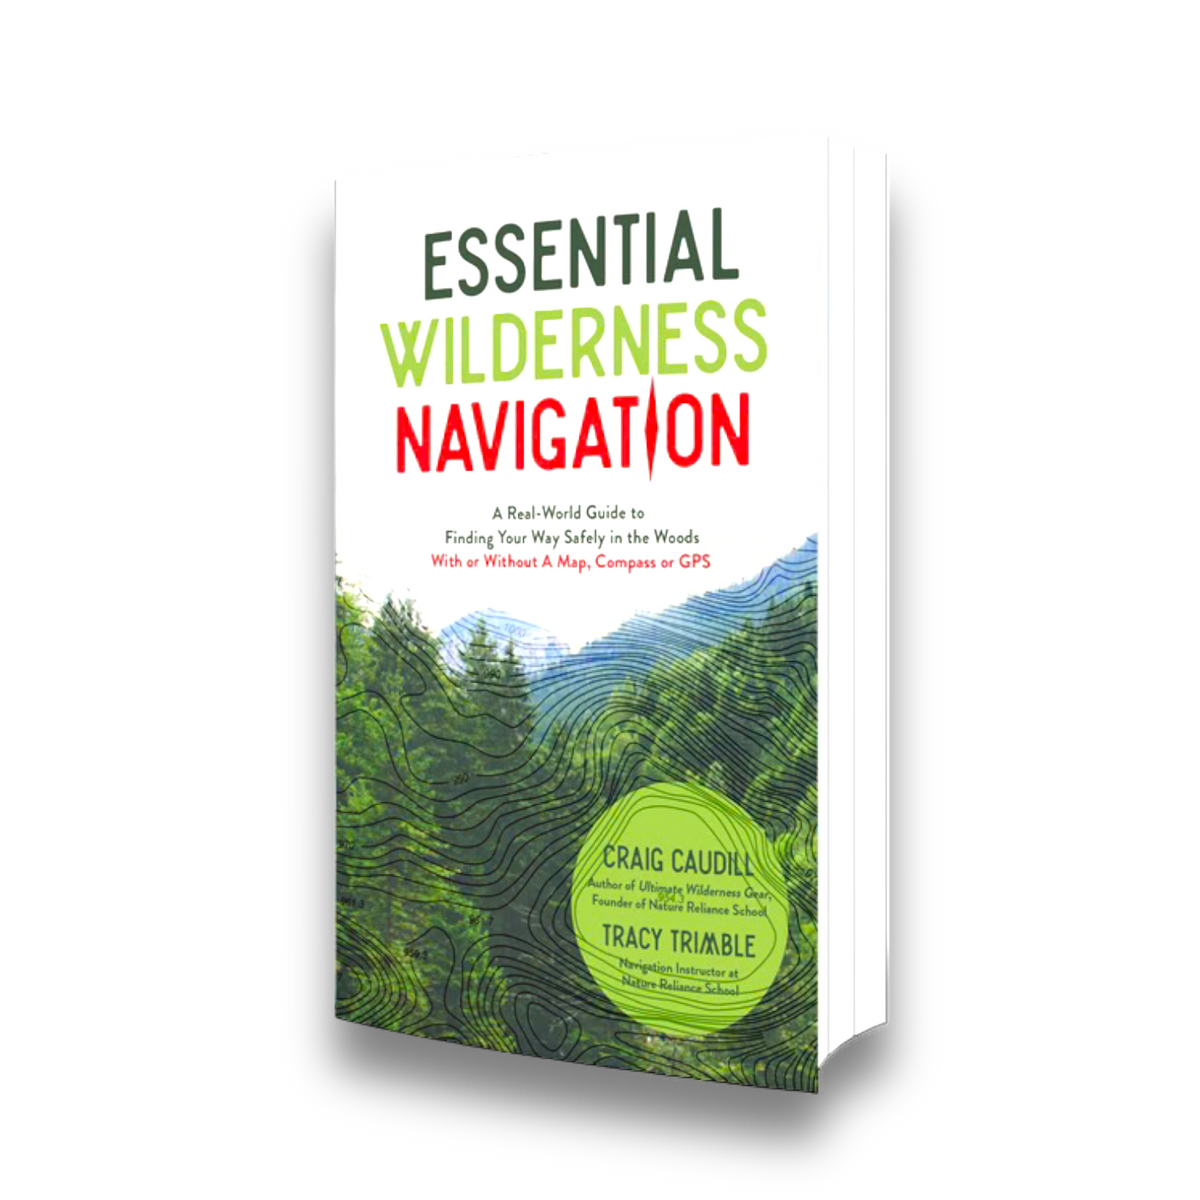 Essential Wilderness Navigation:  A Real-World Guide to Finding Your Way Safely in the Woods With or Without A Map, Compass or GPS